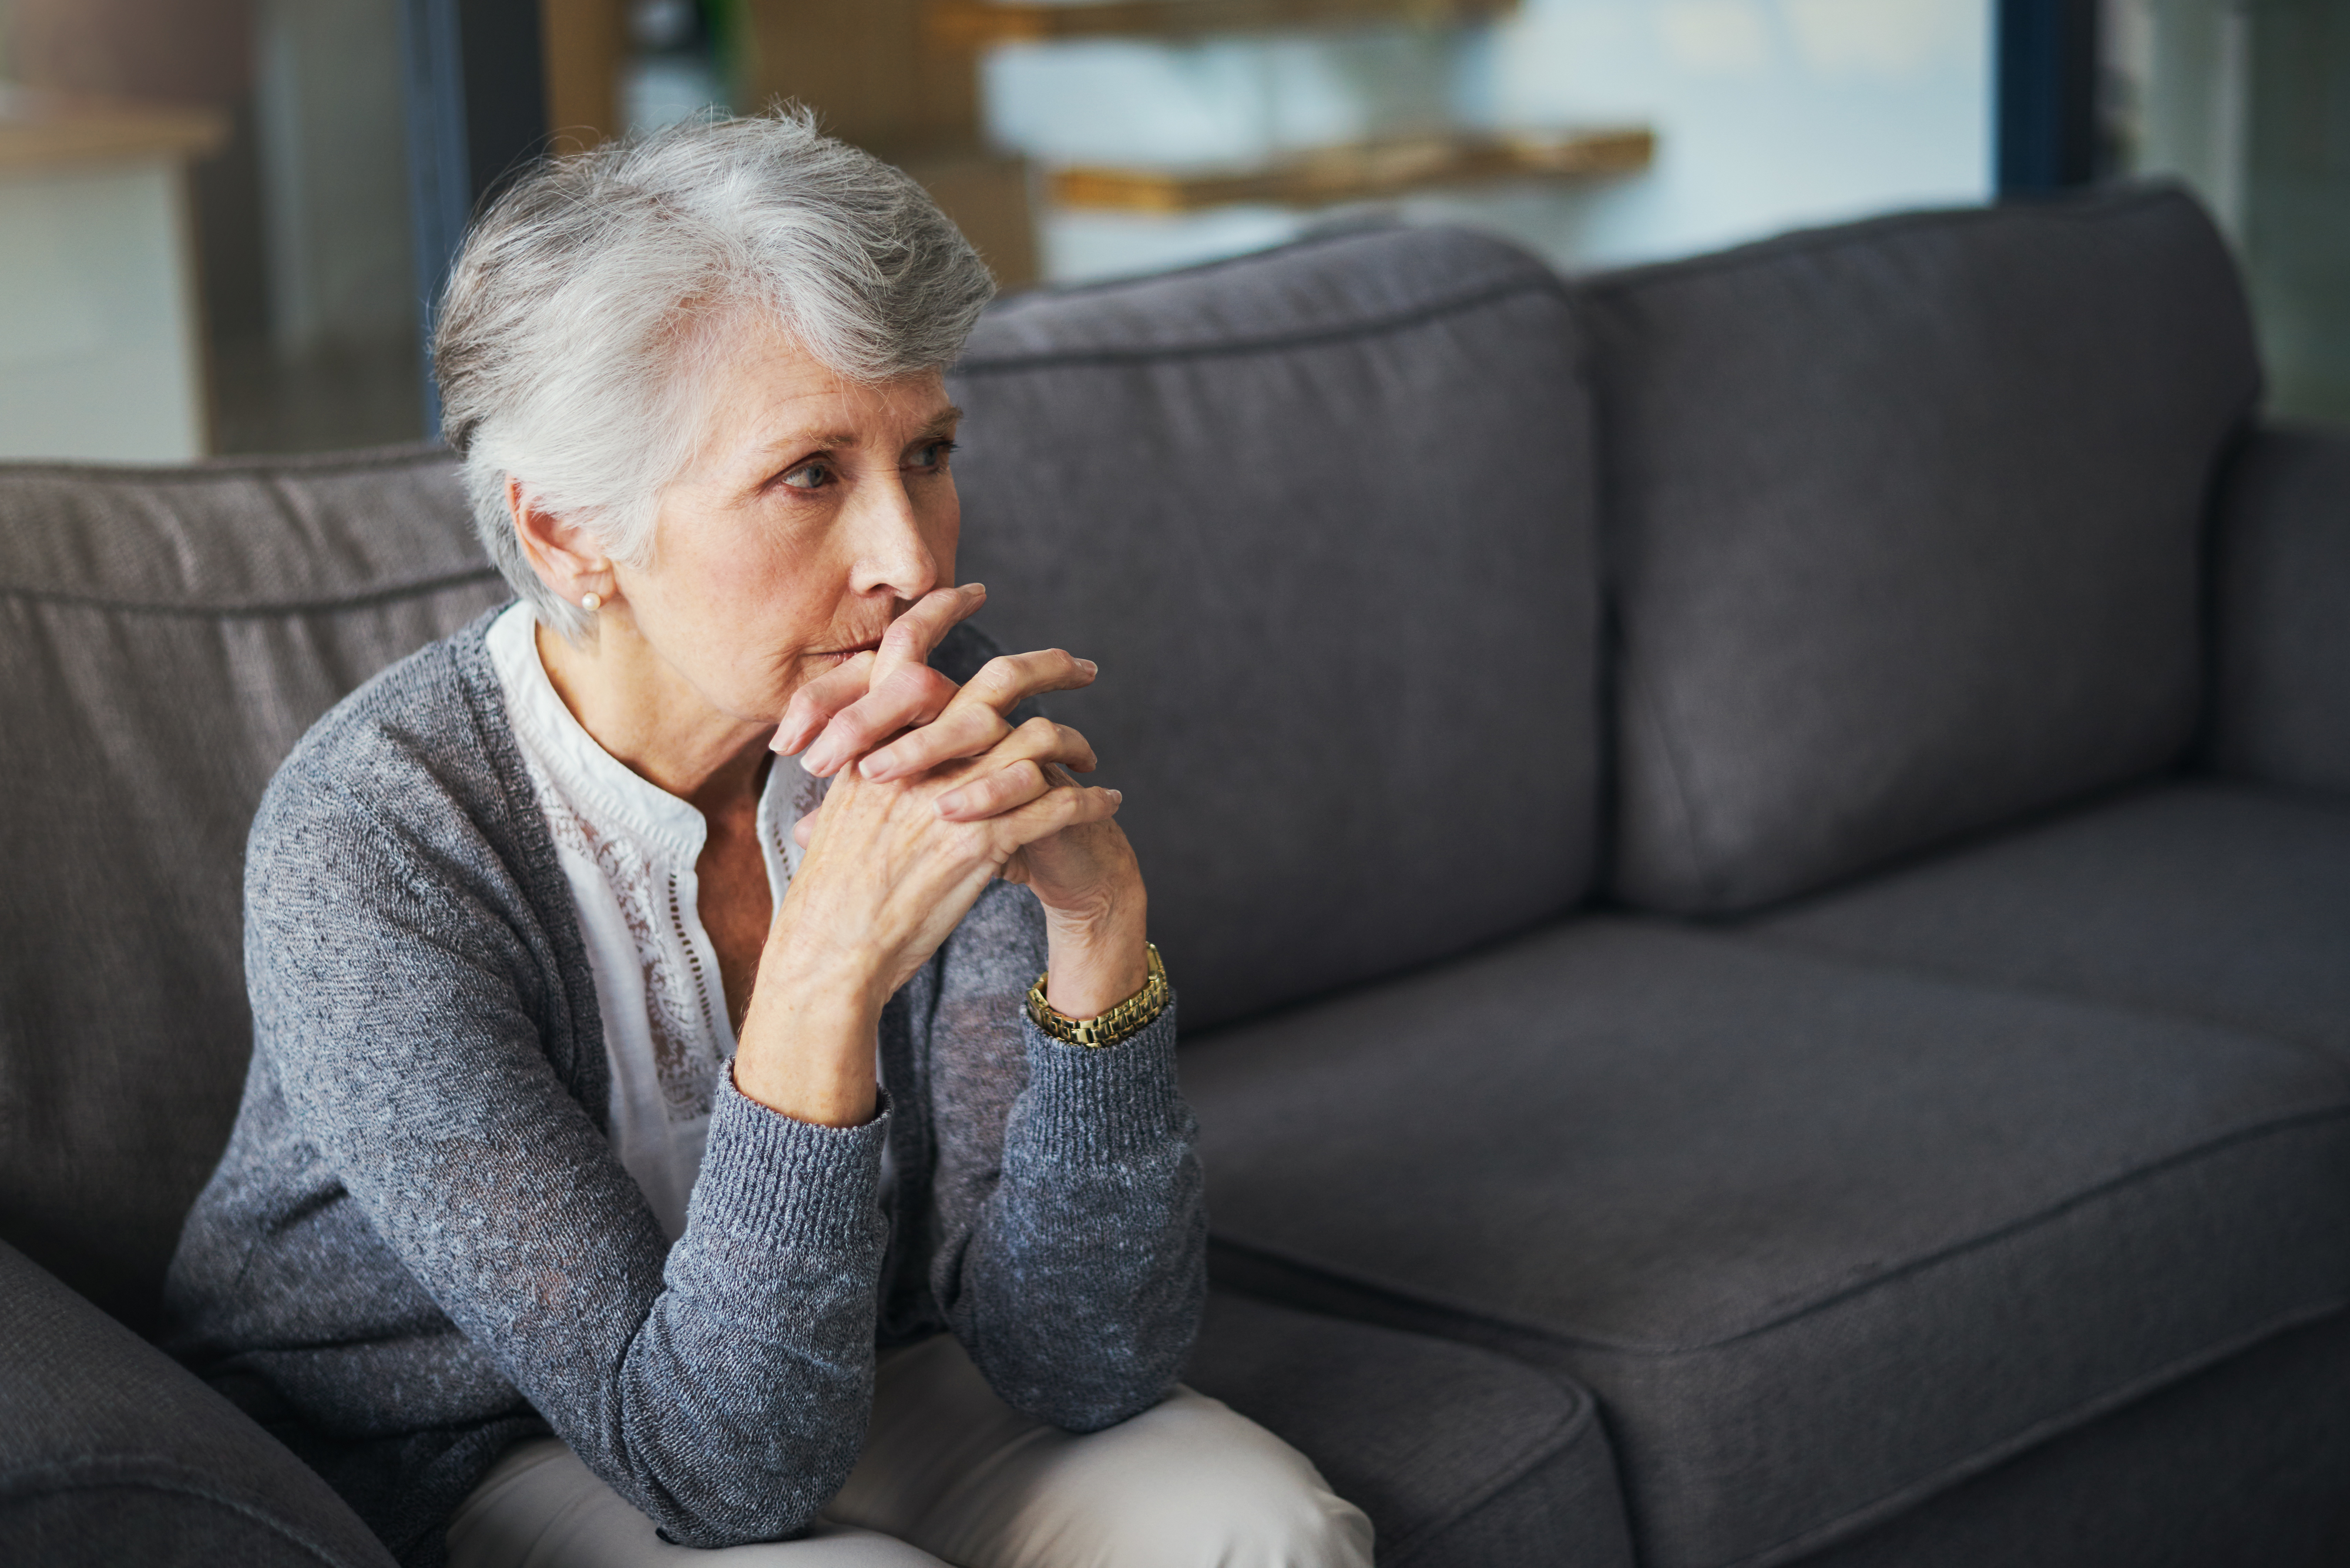 An older woman sitting on a couch with her hands clasped and her elbows resting on her knees